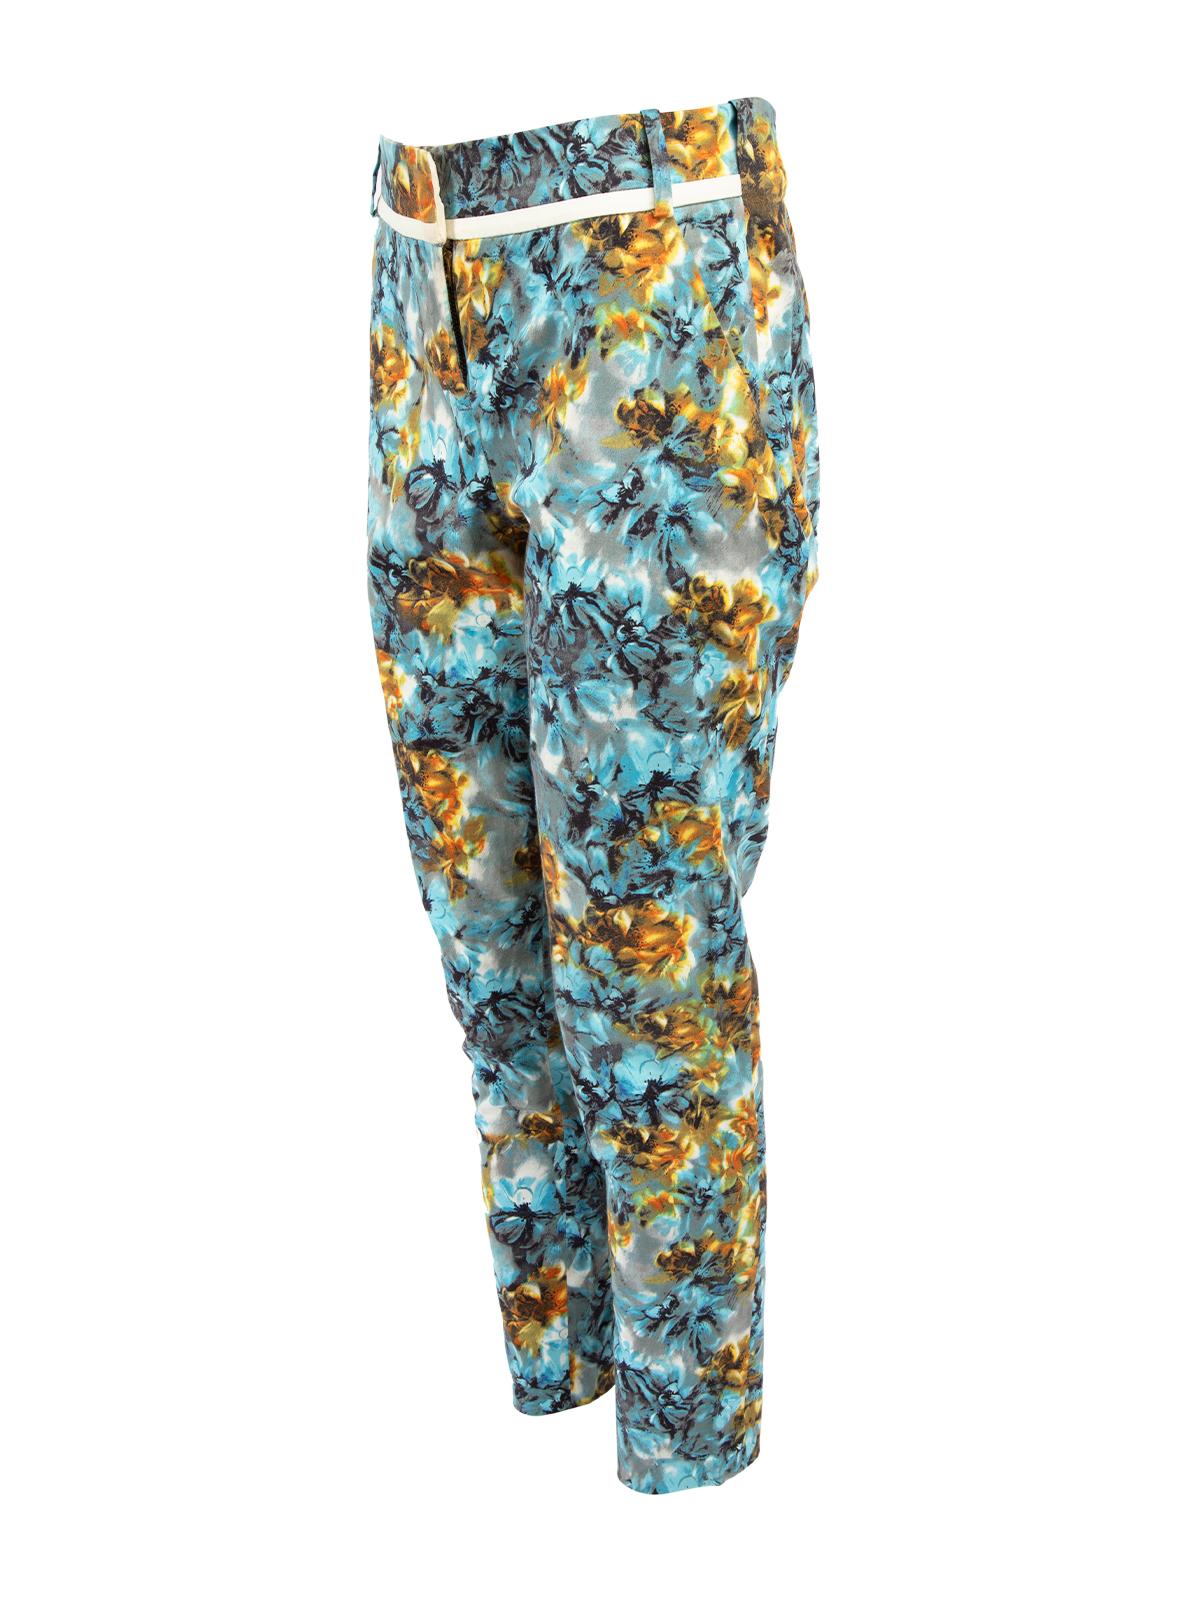 Karen Millen Women's Floral Trousers with Ankle Zip For Sale 1